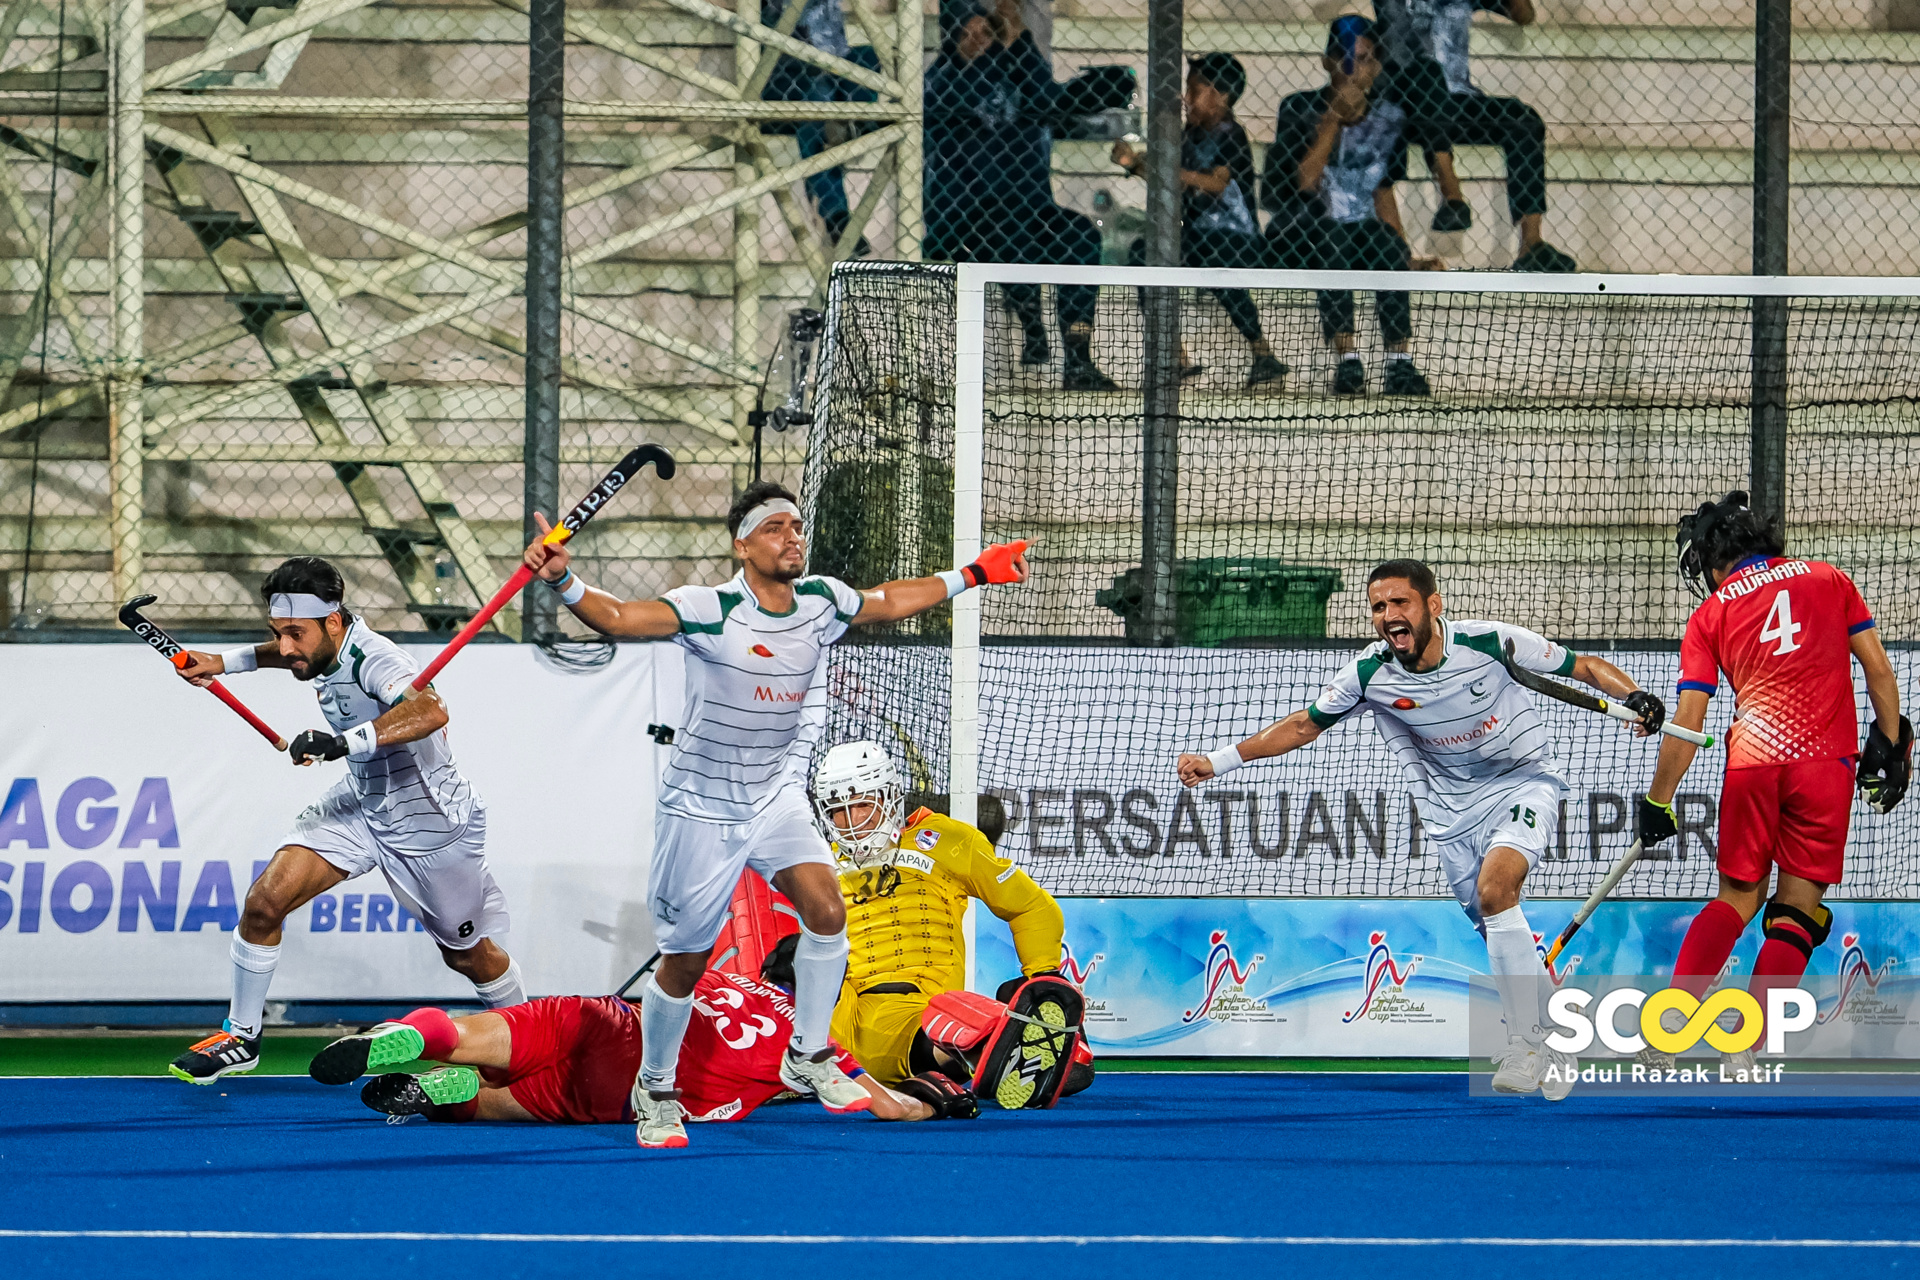 Sultan Azlan Shah Cup: Pakistan’s Roelant calls for early dominance instead of catching up, after 1-1 draw against Japan